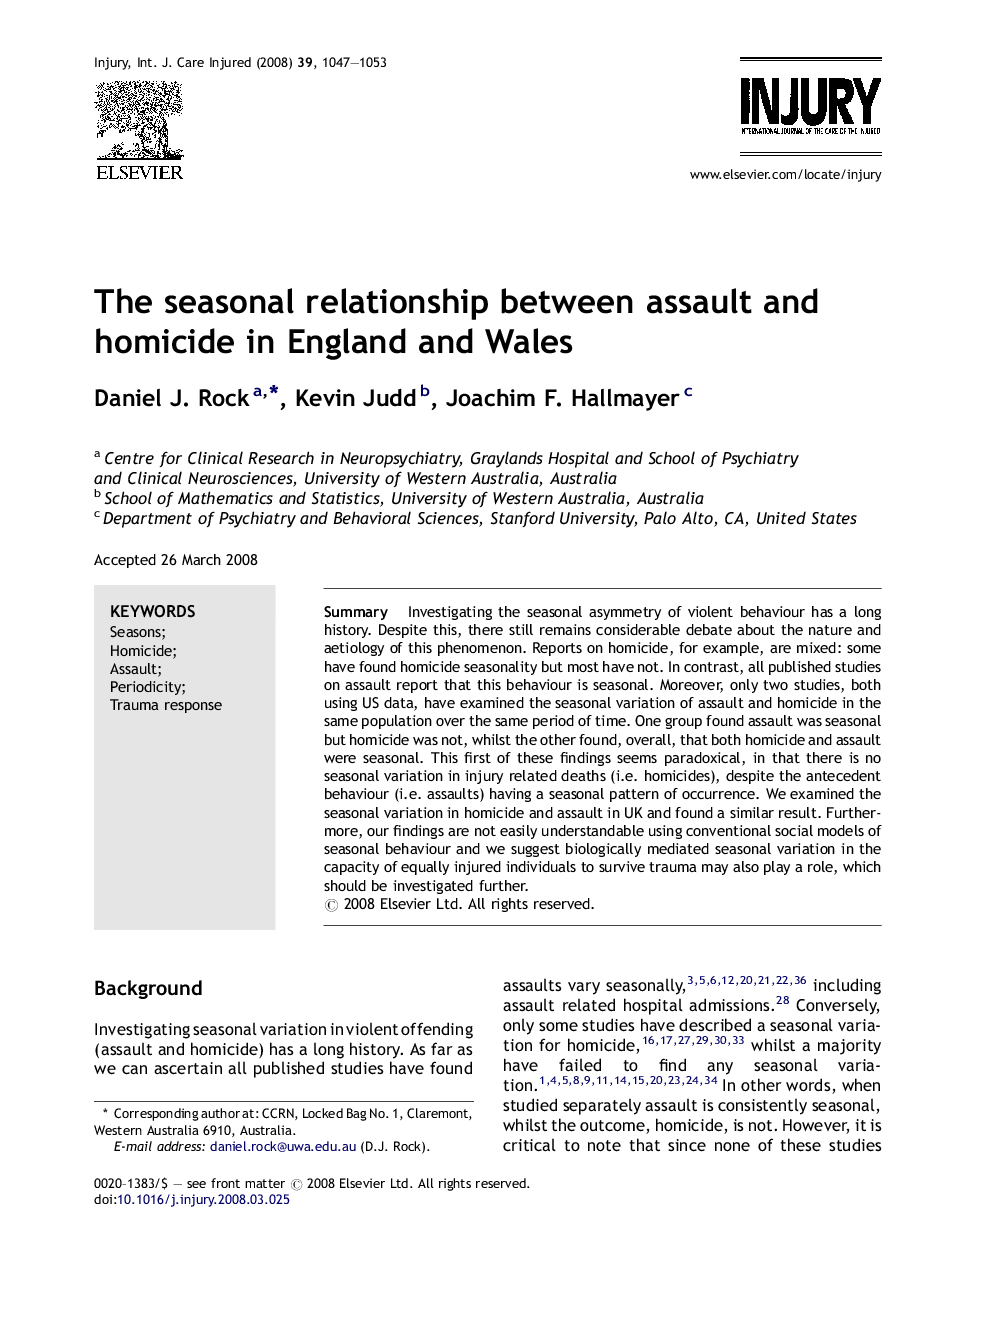 The seasonal relationship between assault and homicide in England and Wales